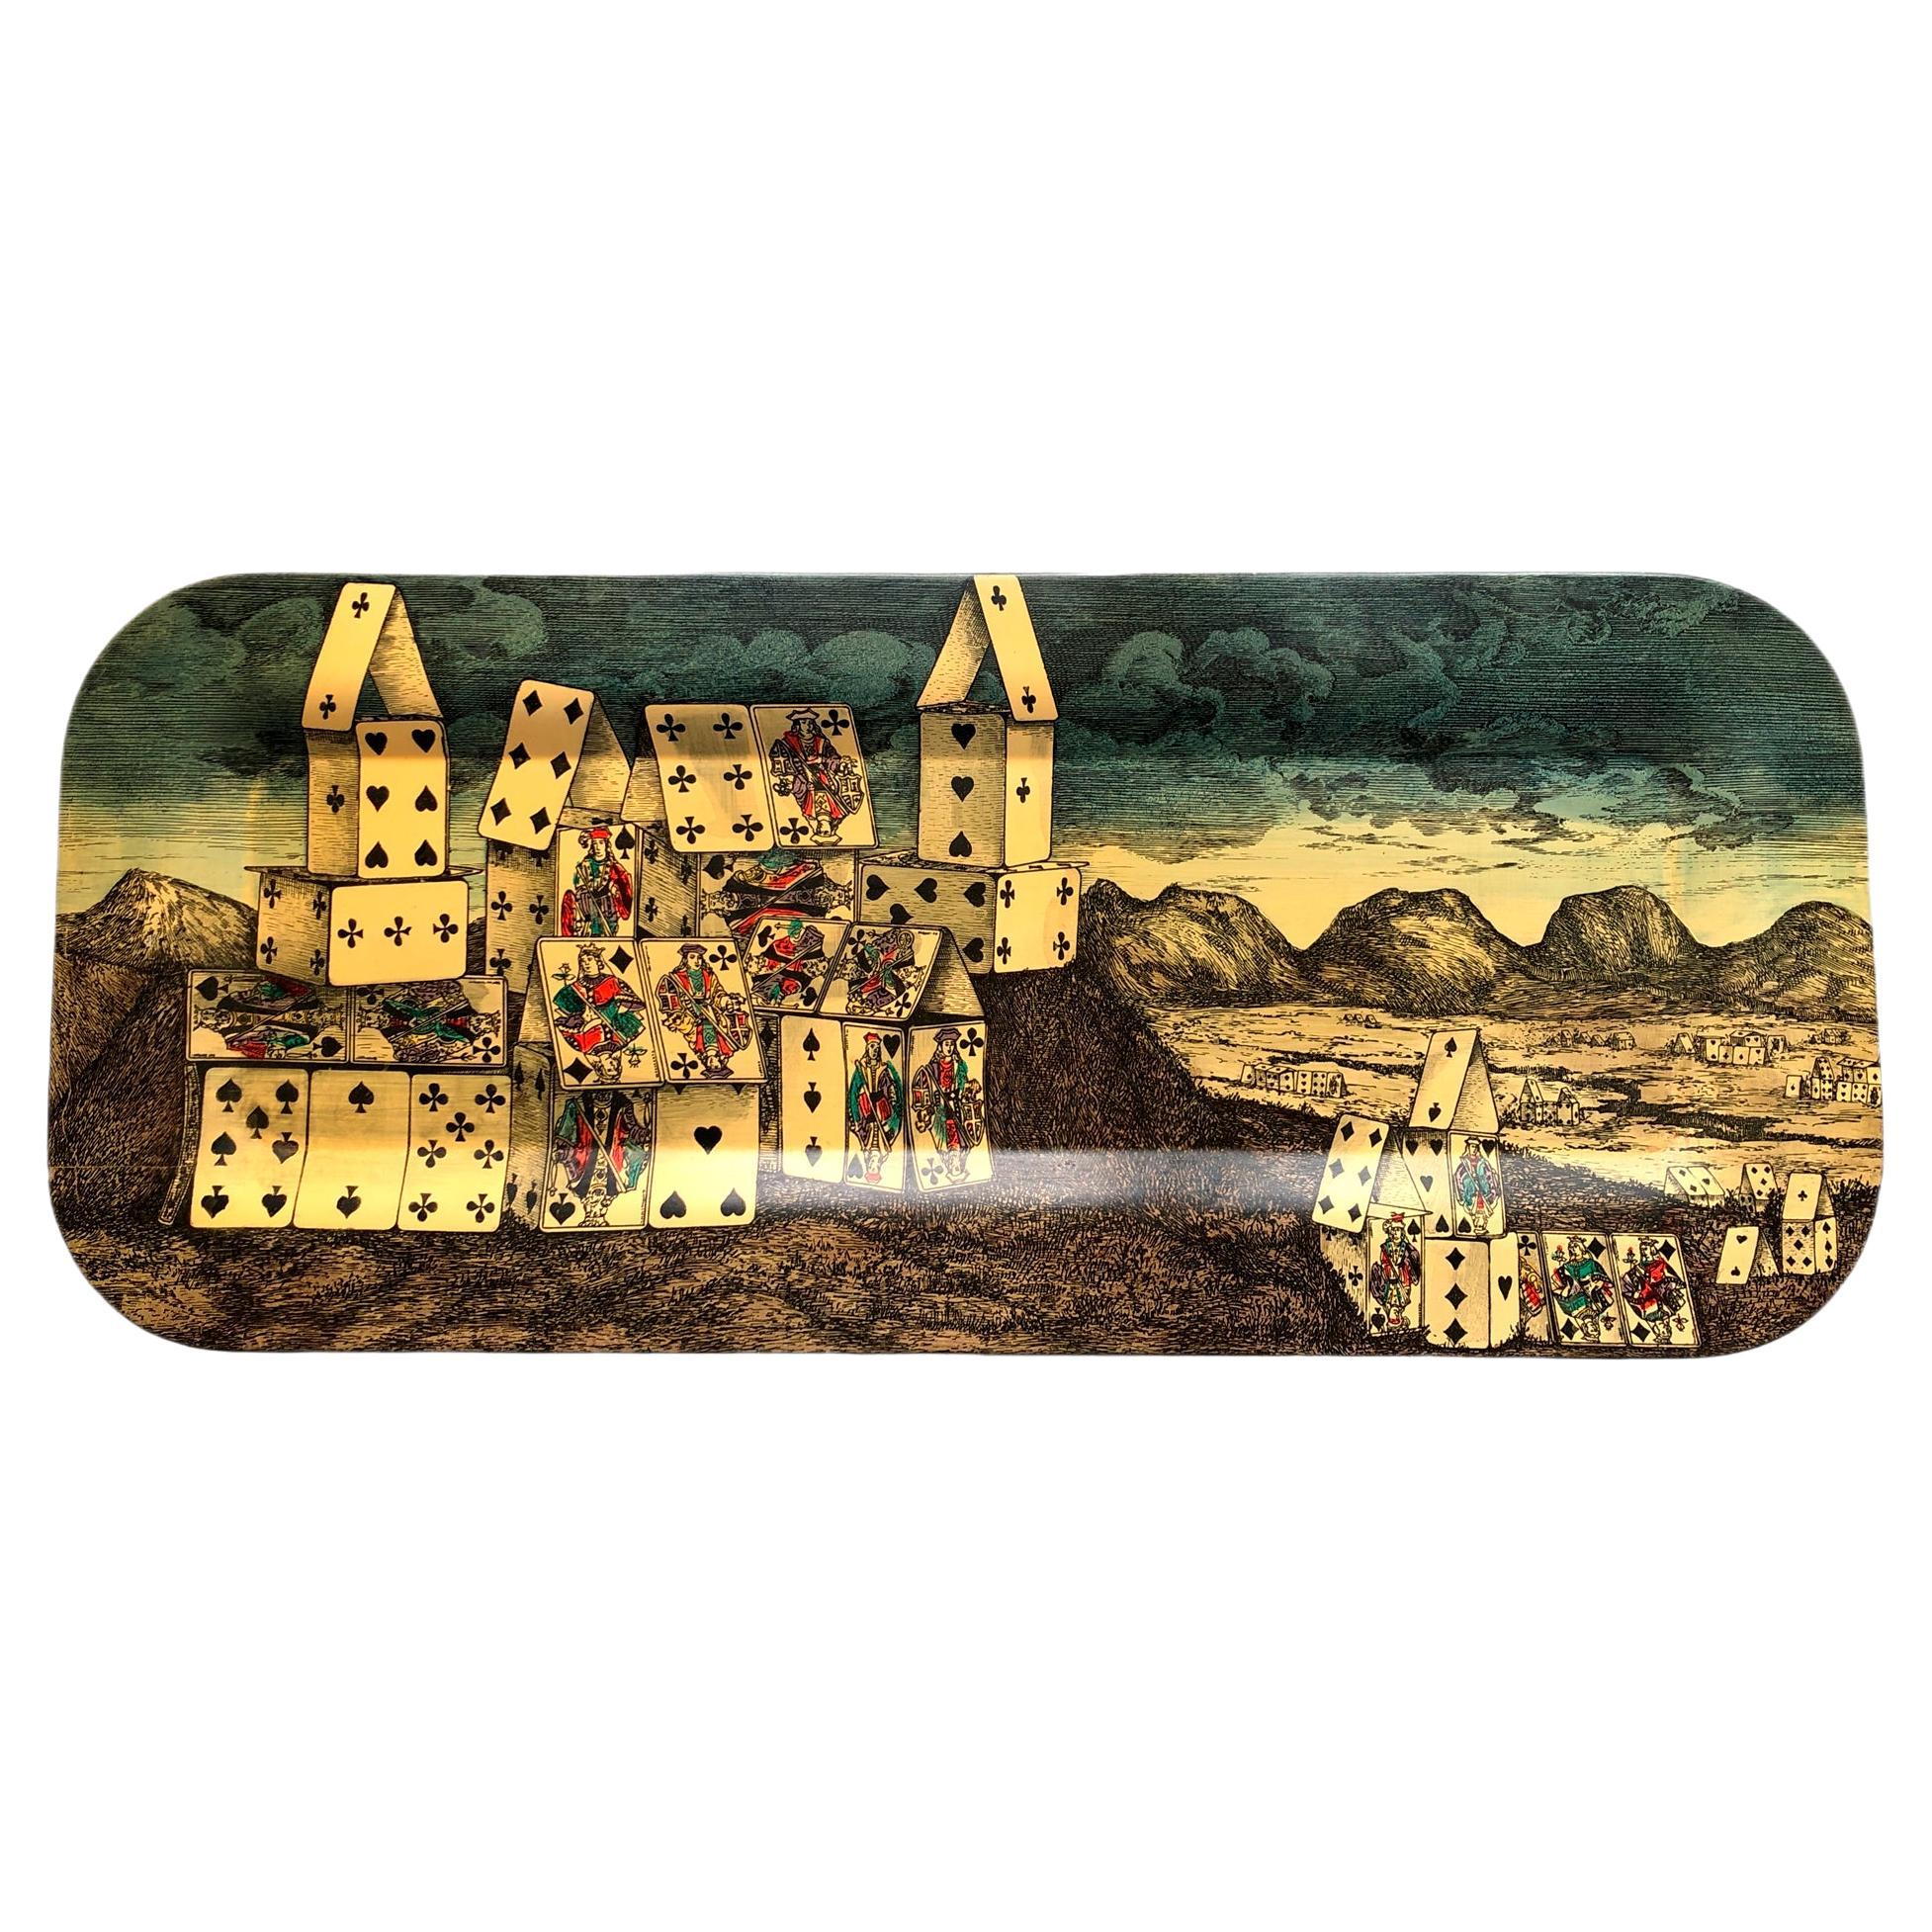 Vintage, rare Piero Fornasetti Rectangular Tray: Città di Carte. Like all Fornasetti accessories, the tray is handcrafted using original artisan techniques. Lithographed plate and labeled. This tray is silk-screened by hand, painted by hand and